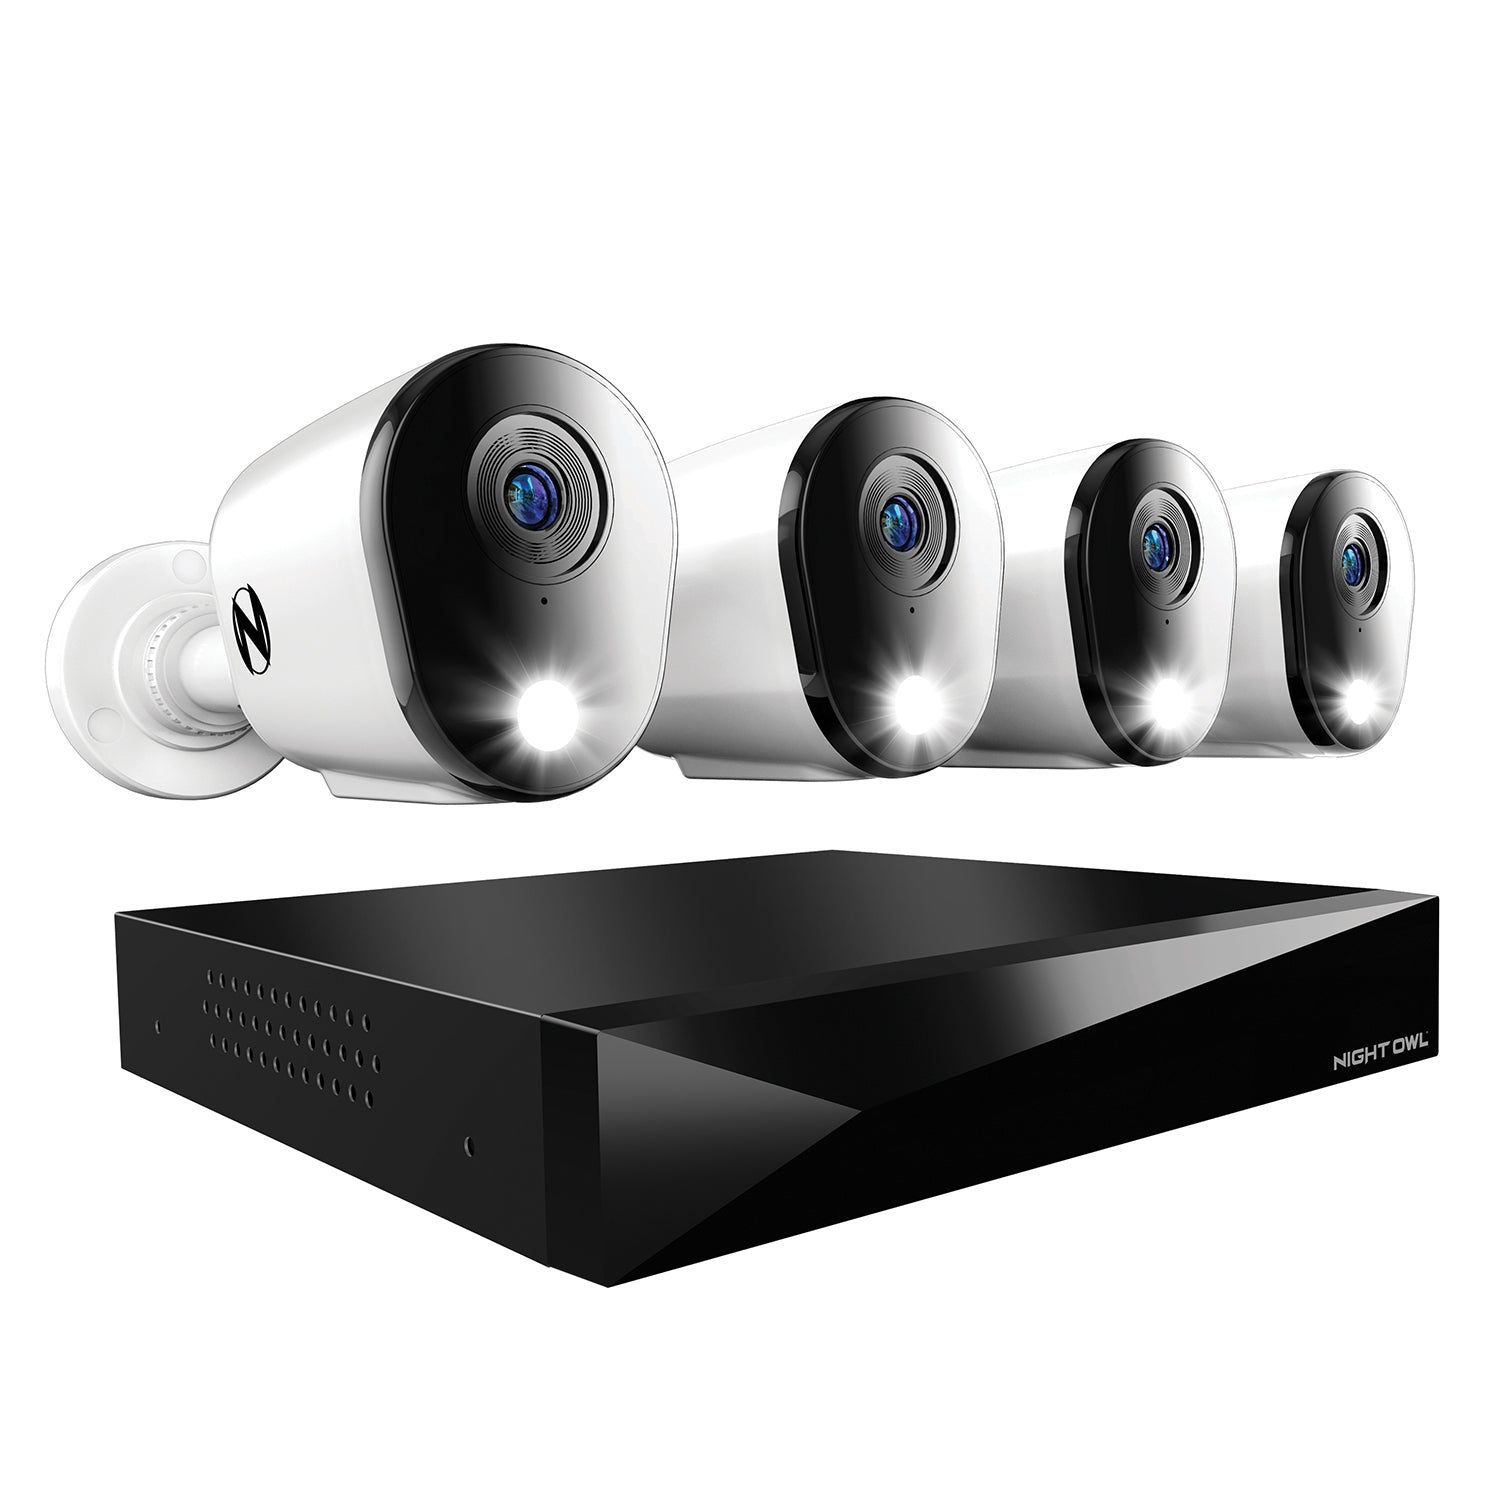 2-Way Audio 12 Channel DVR Security System with 1TB Hard Drive and 4 W –  Night Owl SP, LLC